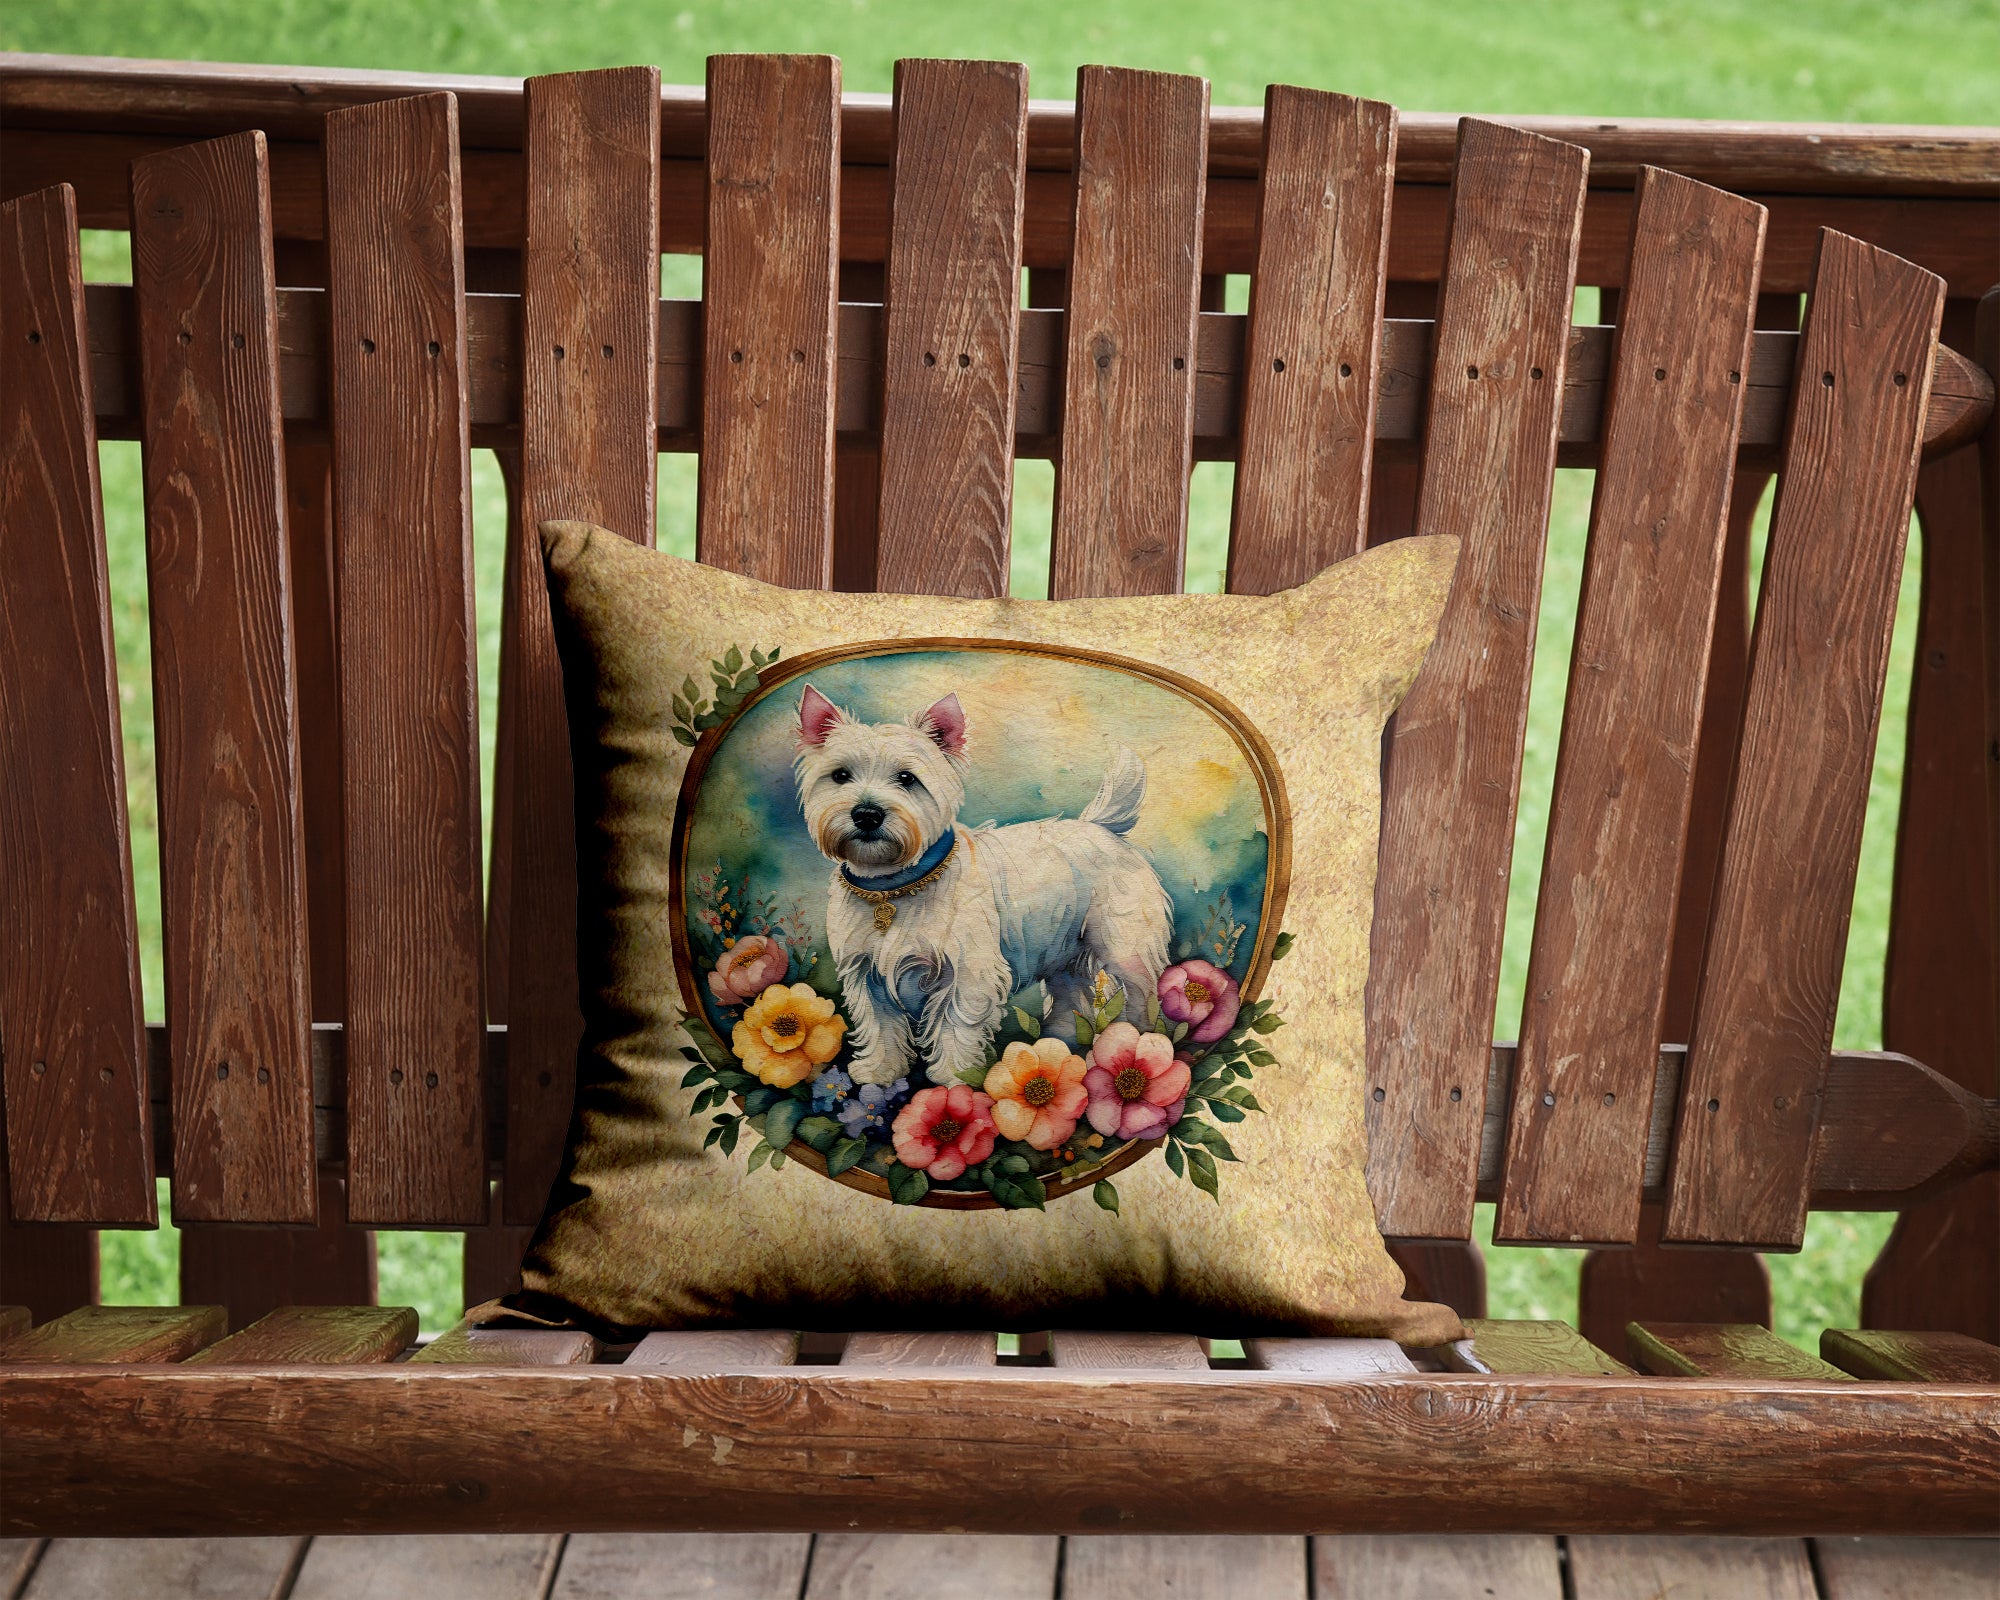 Buy this Westie and Flowers Fabric Decorative Pillow